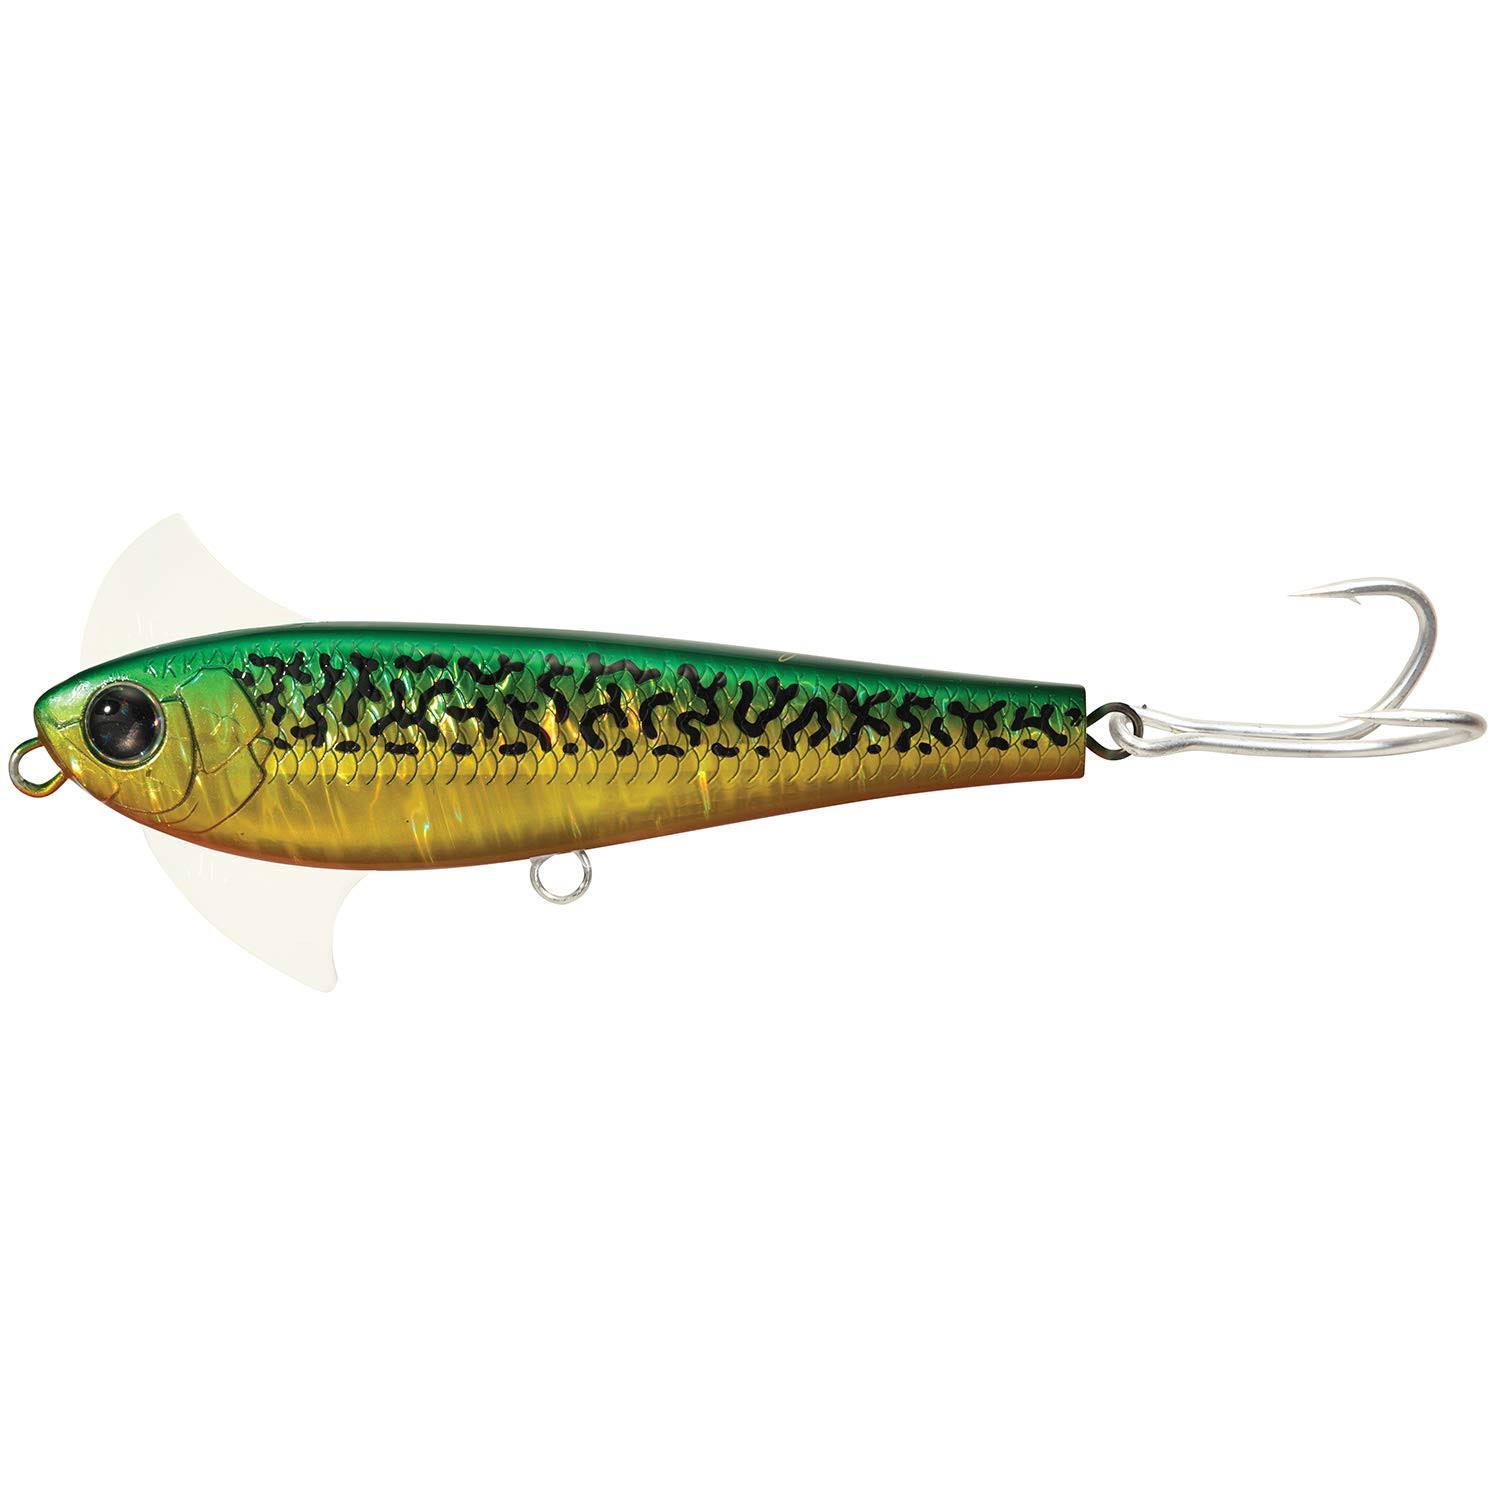 Shimano Waxwing Jigs | Boating & Fishing | Delivery guaranteed | 30 Day Money Back Guarantee | Free Shipping On All Orders